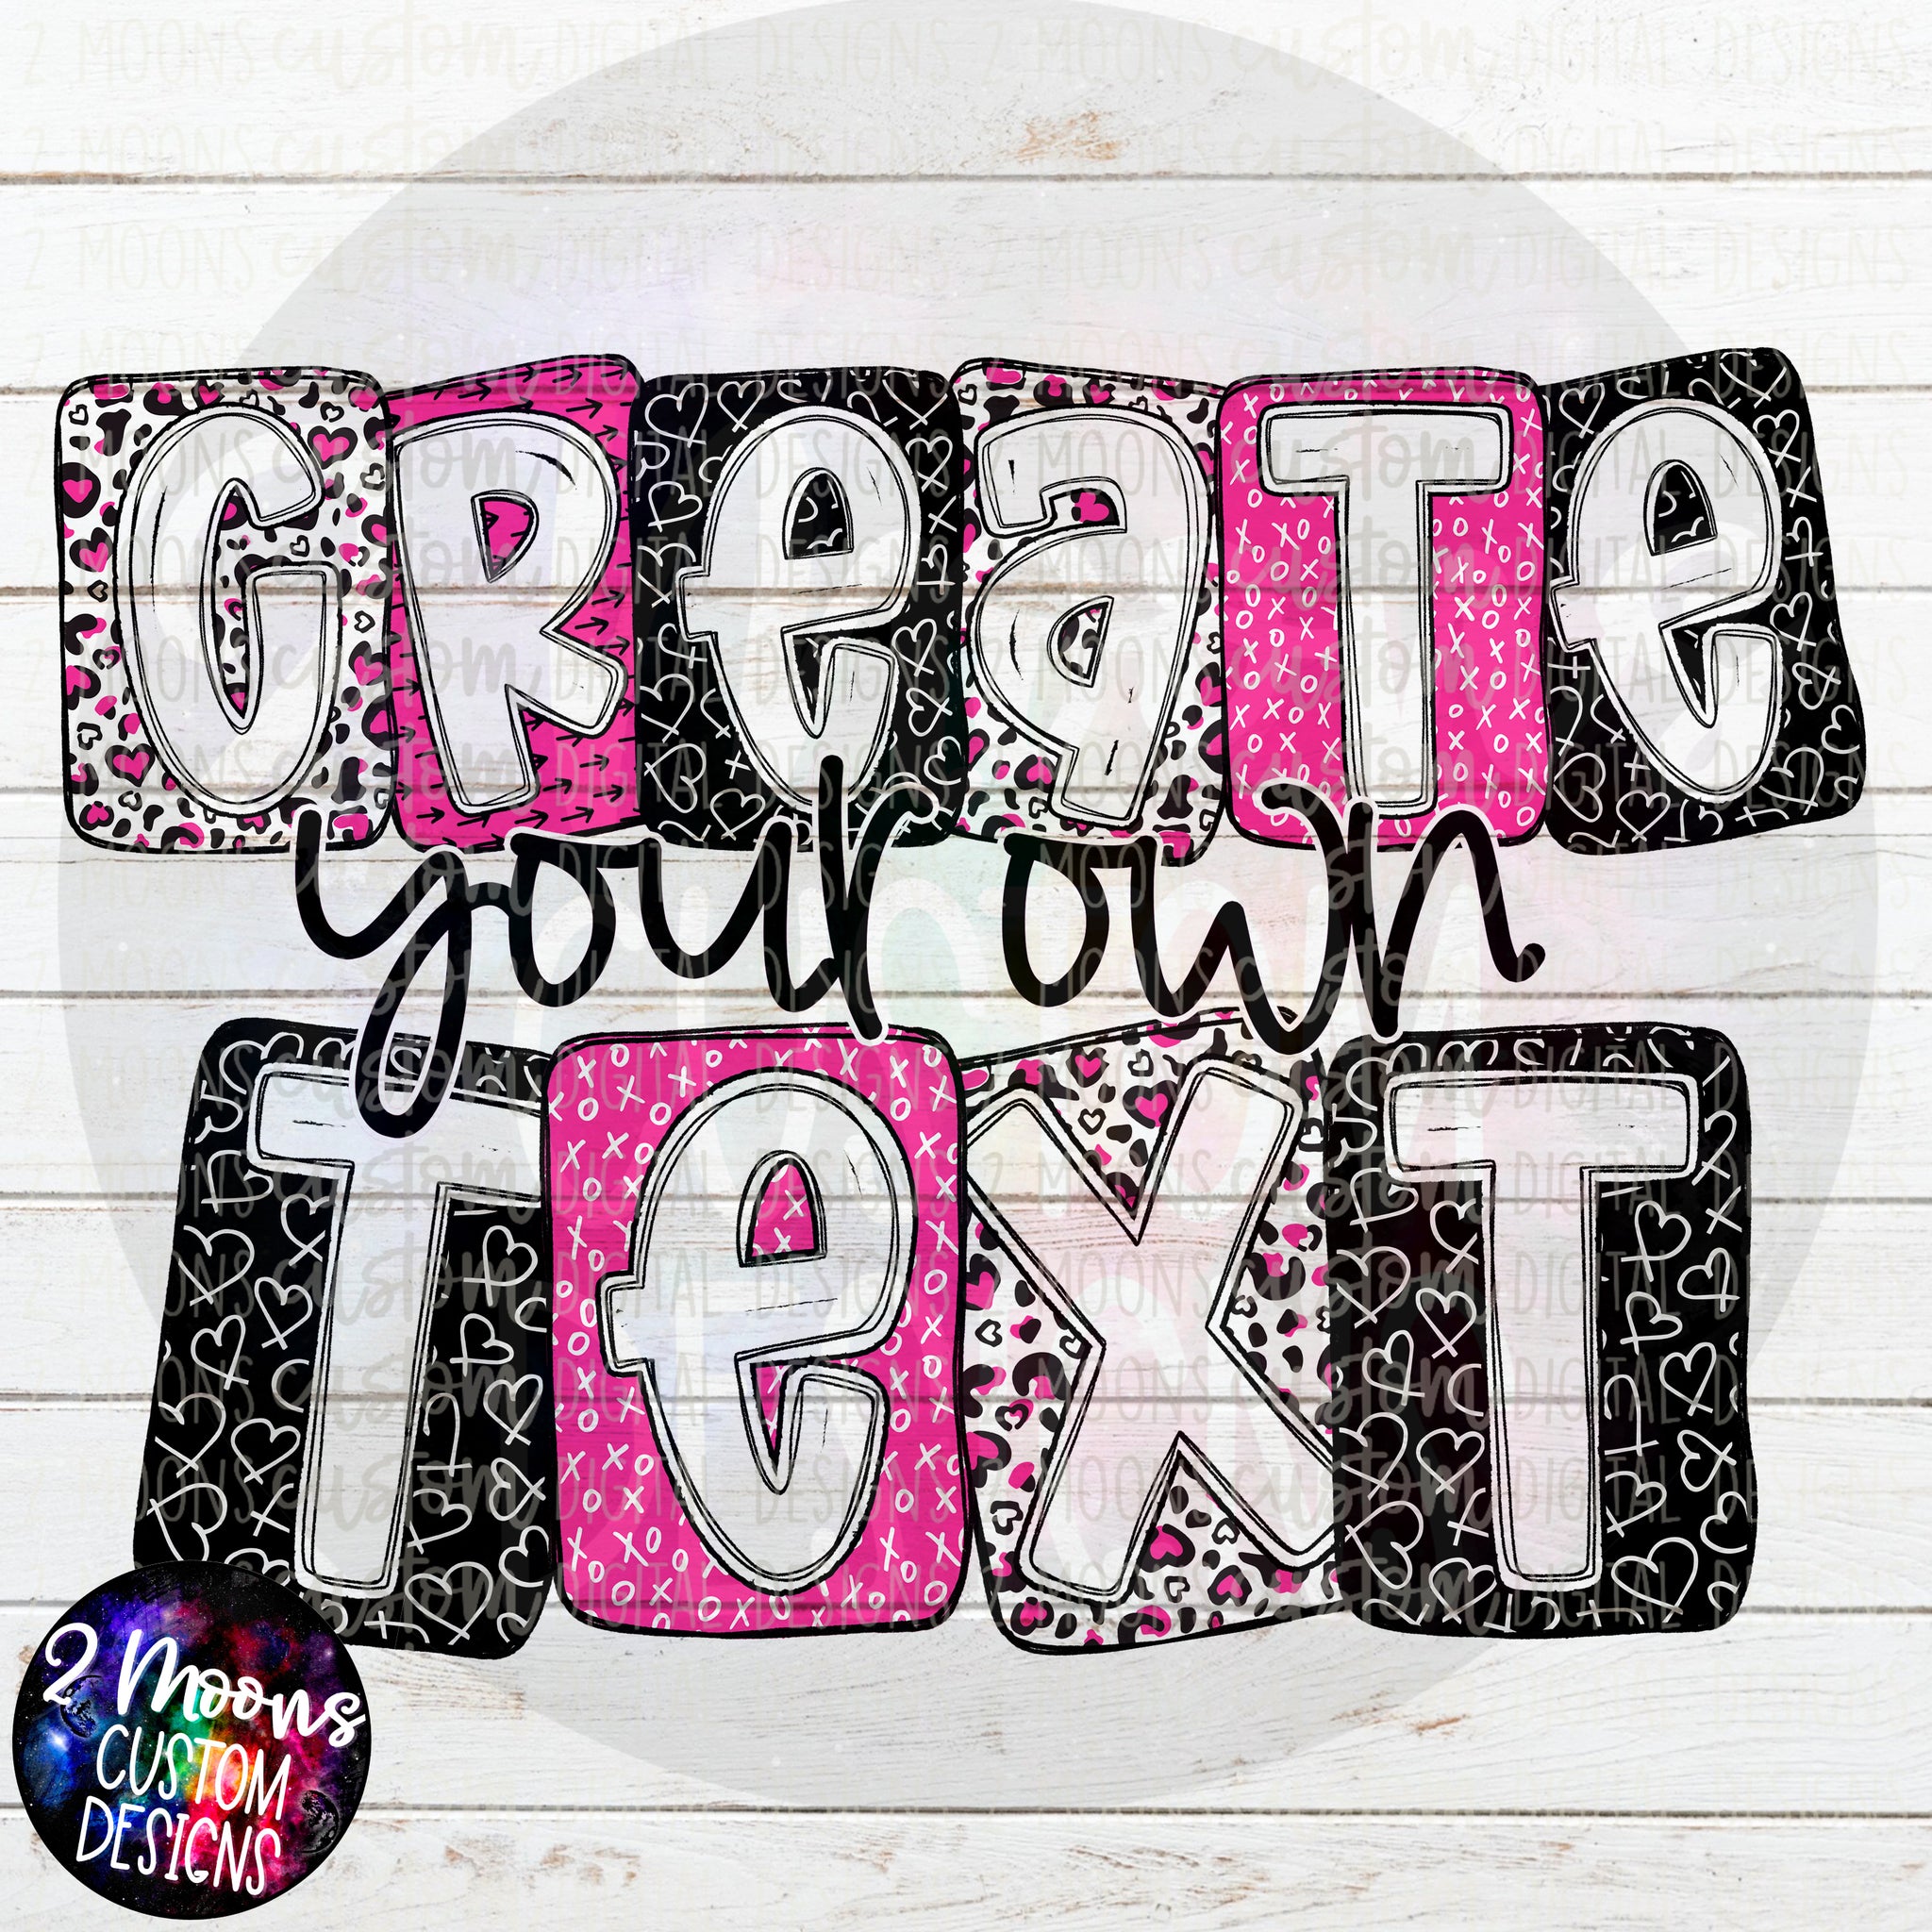 Create your own Text- Boxy V-Day Doodle Alpha Pack- Pink- Handlettered